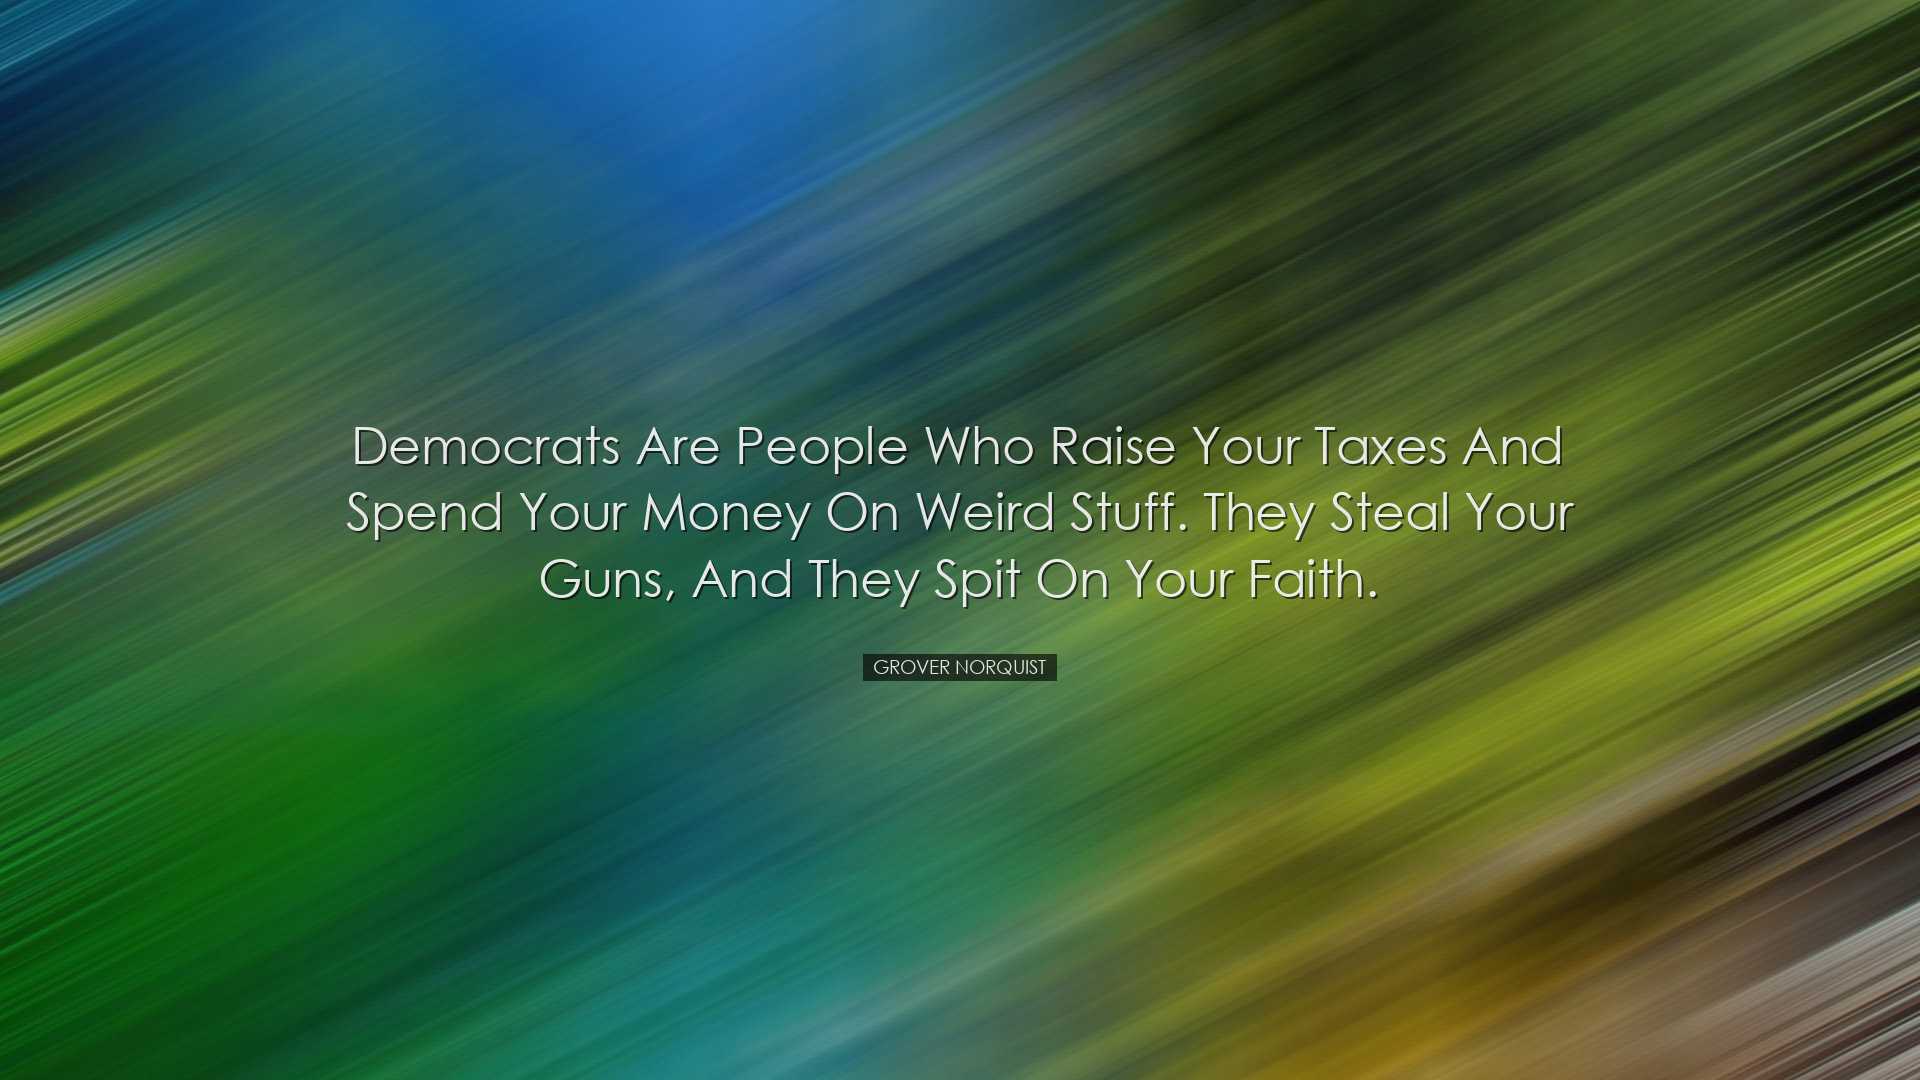 Democrats are people who raise your taxes and spend your money on